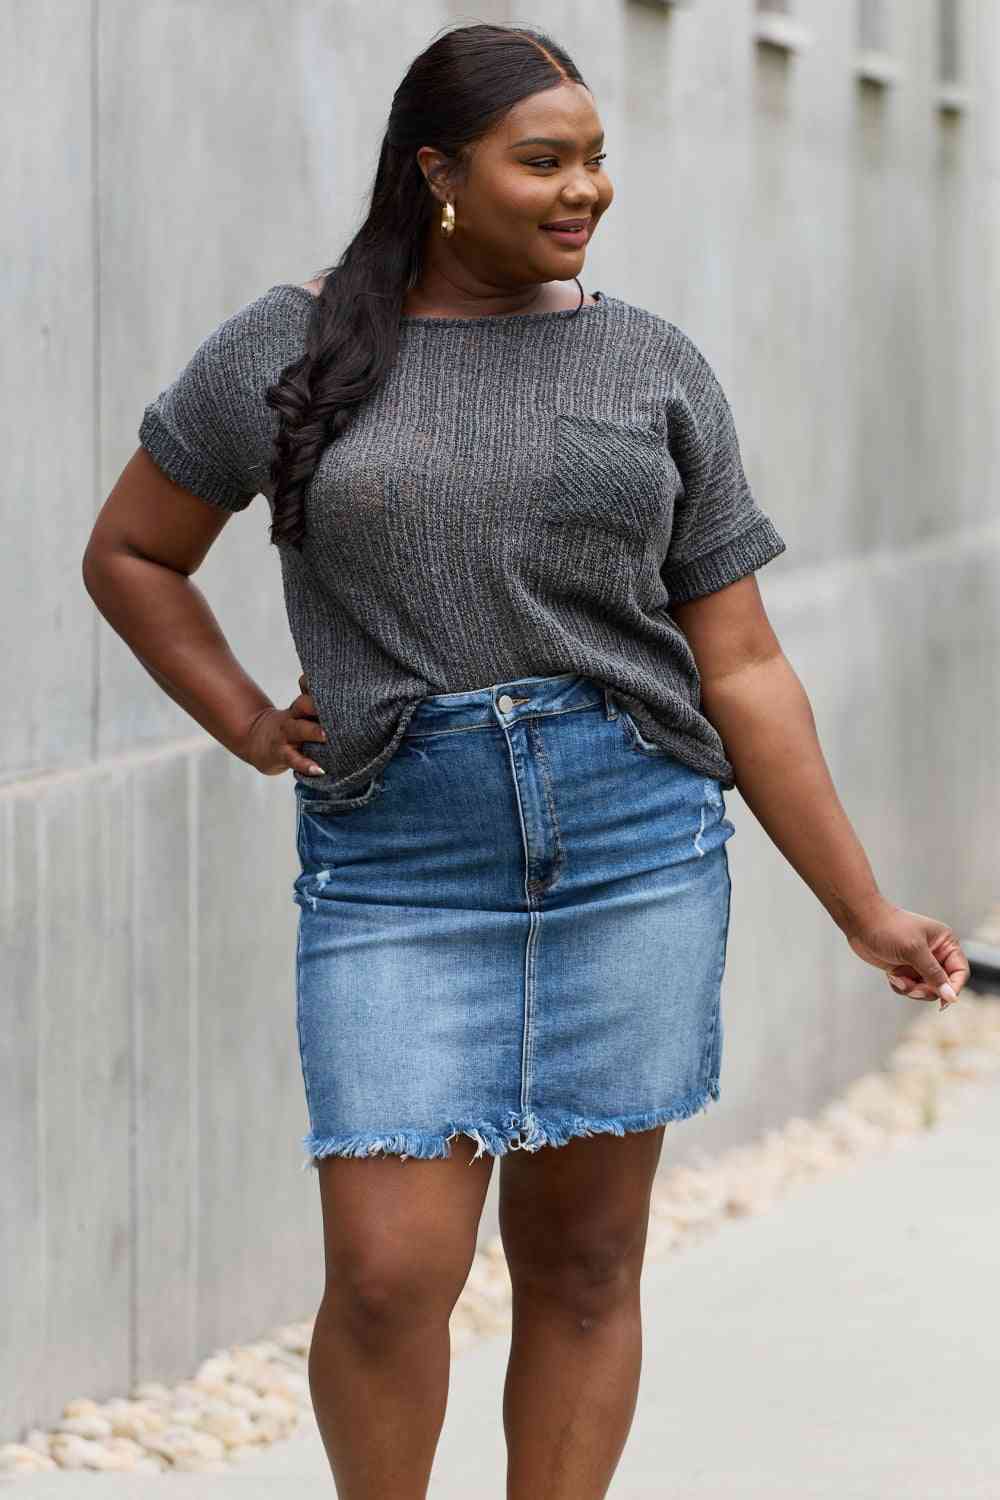 e.Luna Chunky Knit Short Sleeve Top in Gray